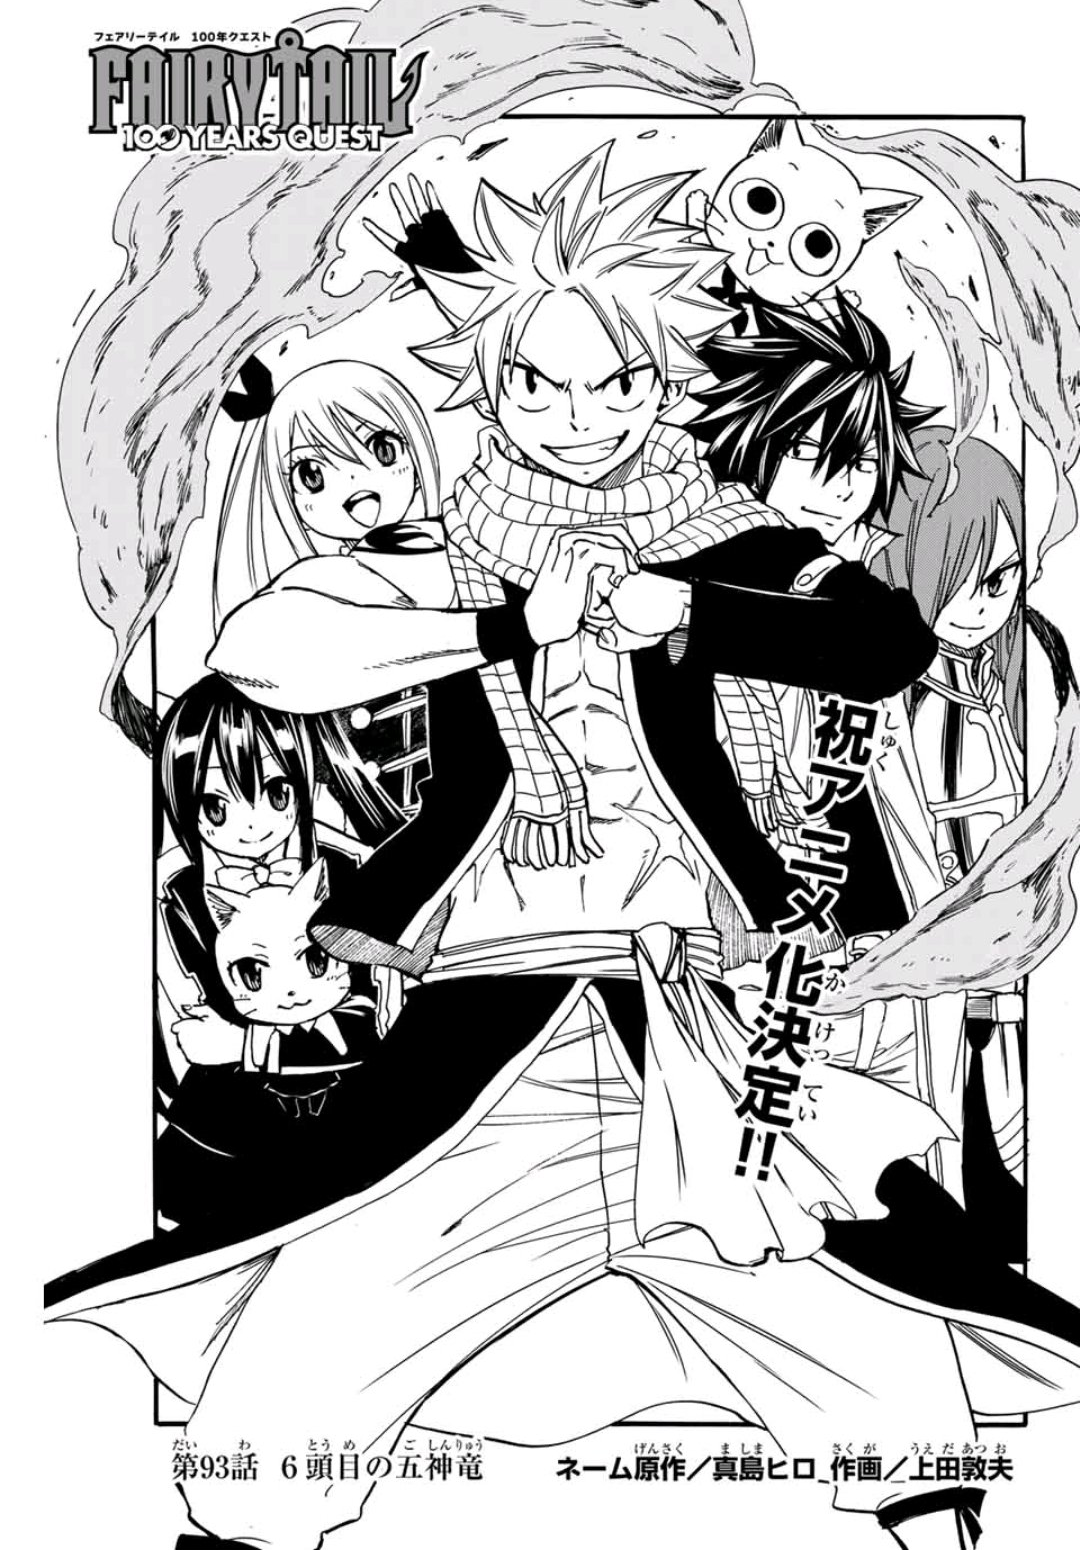 Fairy Tail: 100 Years Quest Chapter 93 | Fairy Tail Wiki | Fandom